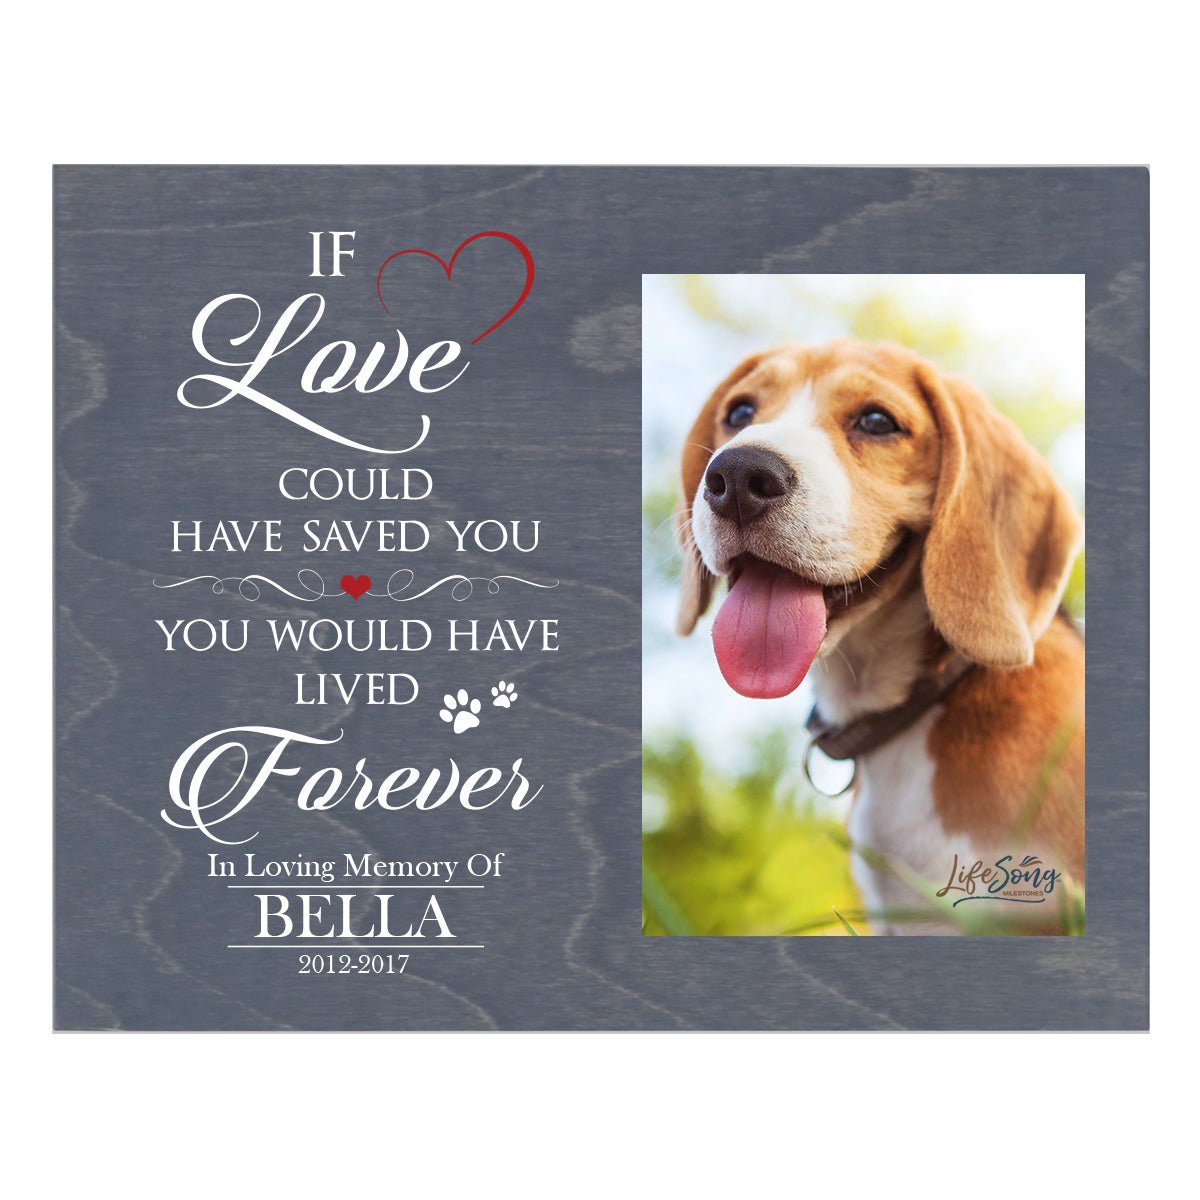 Pet Memorial Photo Wall Plaque Décor - If Love Could Have Saved You - LifeSong Milestones